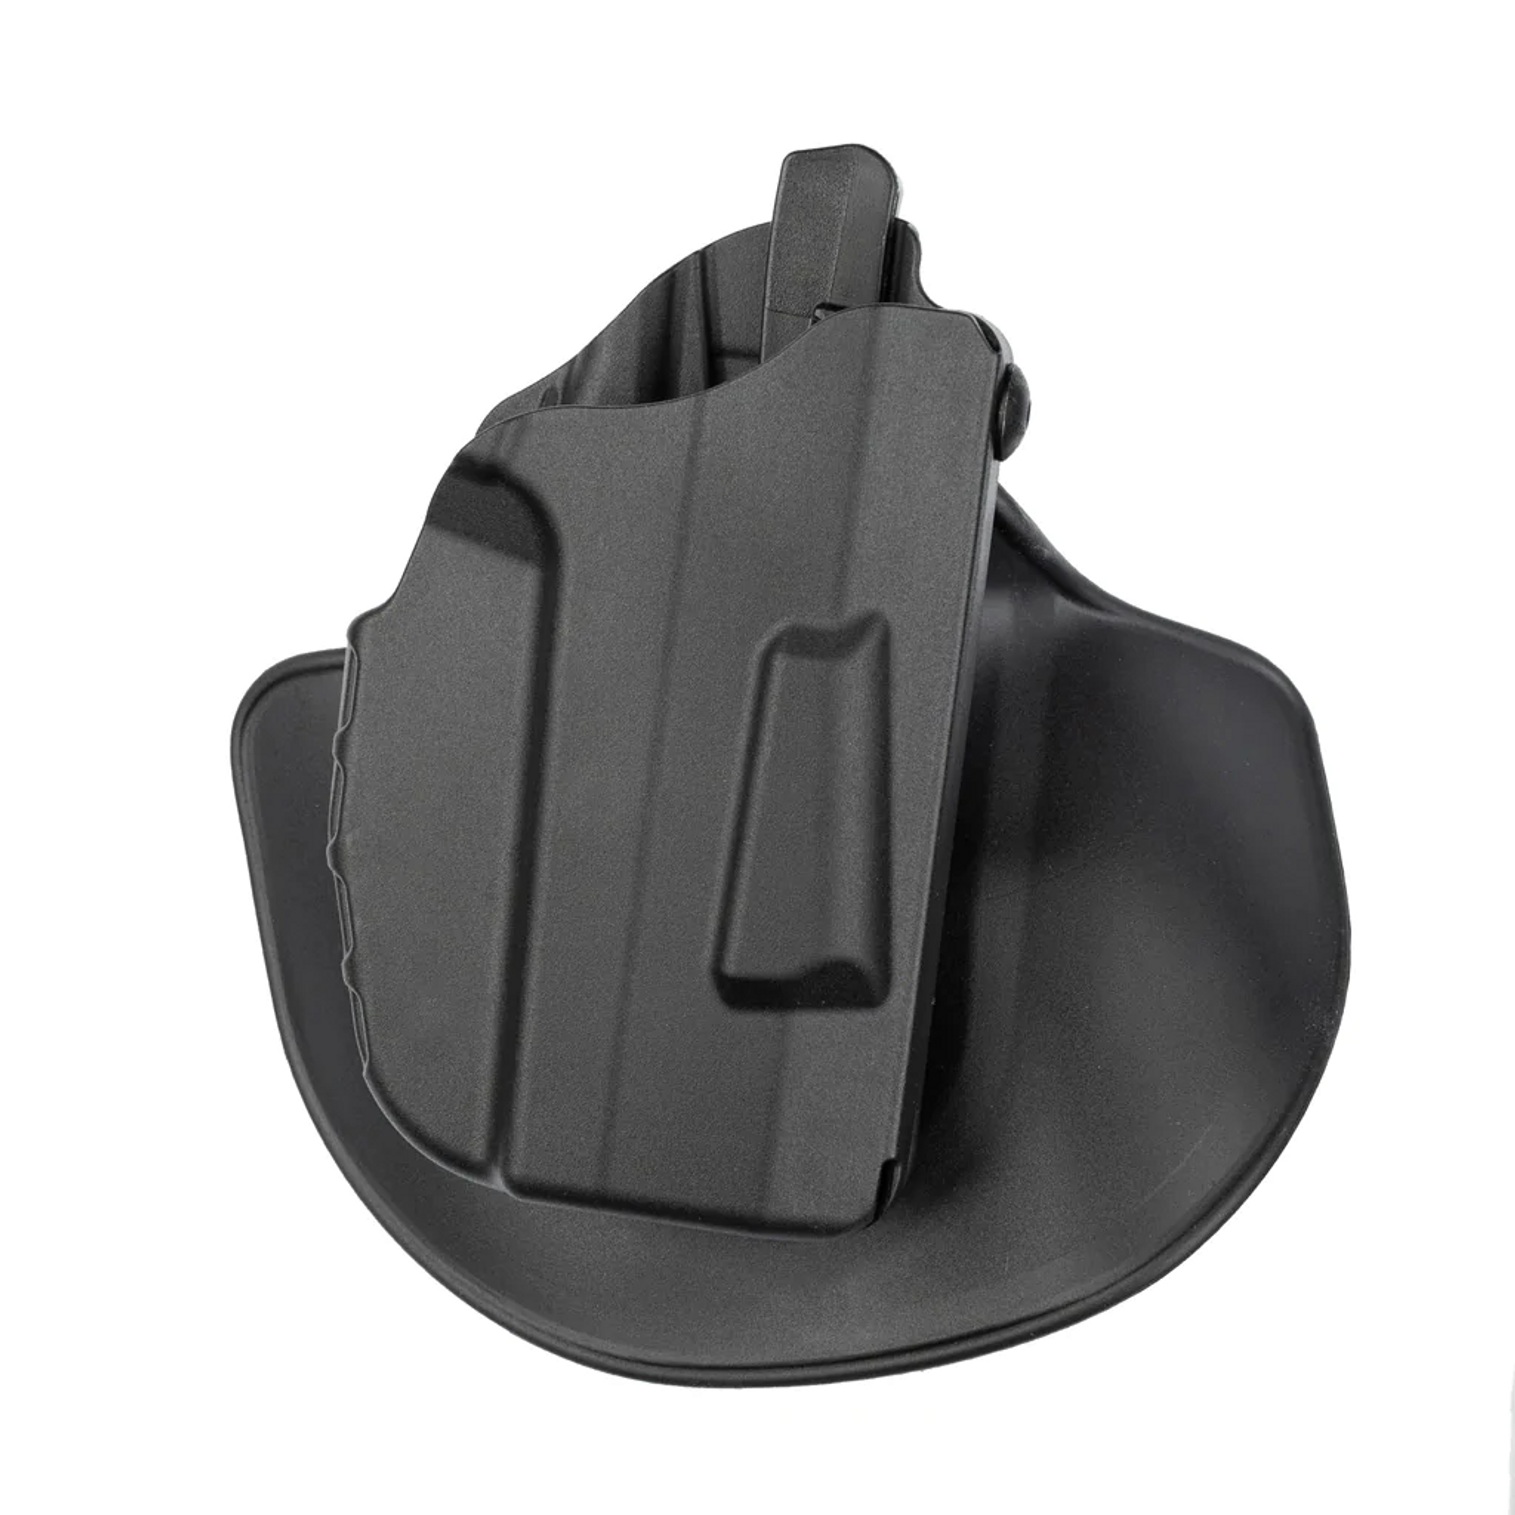 Model 7378 7ts Als Concealment Paddle And Belt Loop Combo Holster For Glock 19 W/ Compact Light - KR7378-28327-412